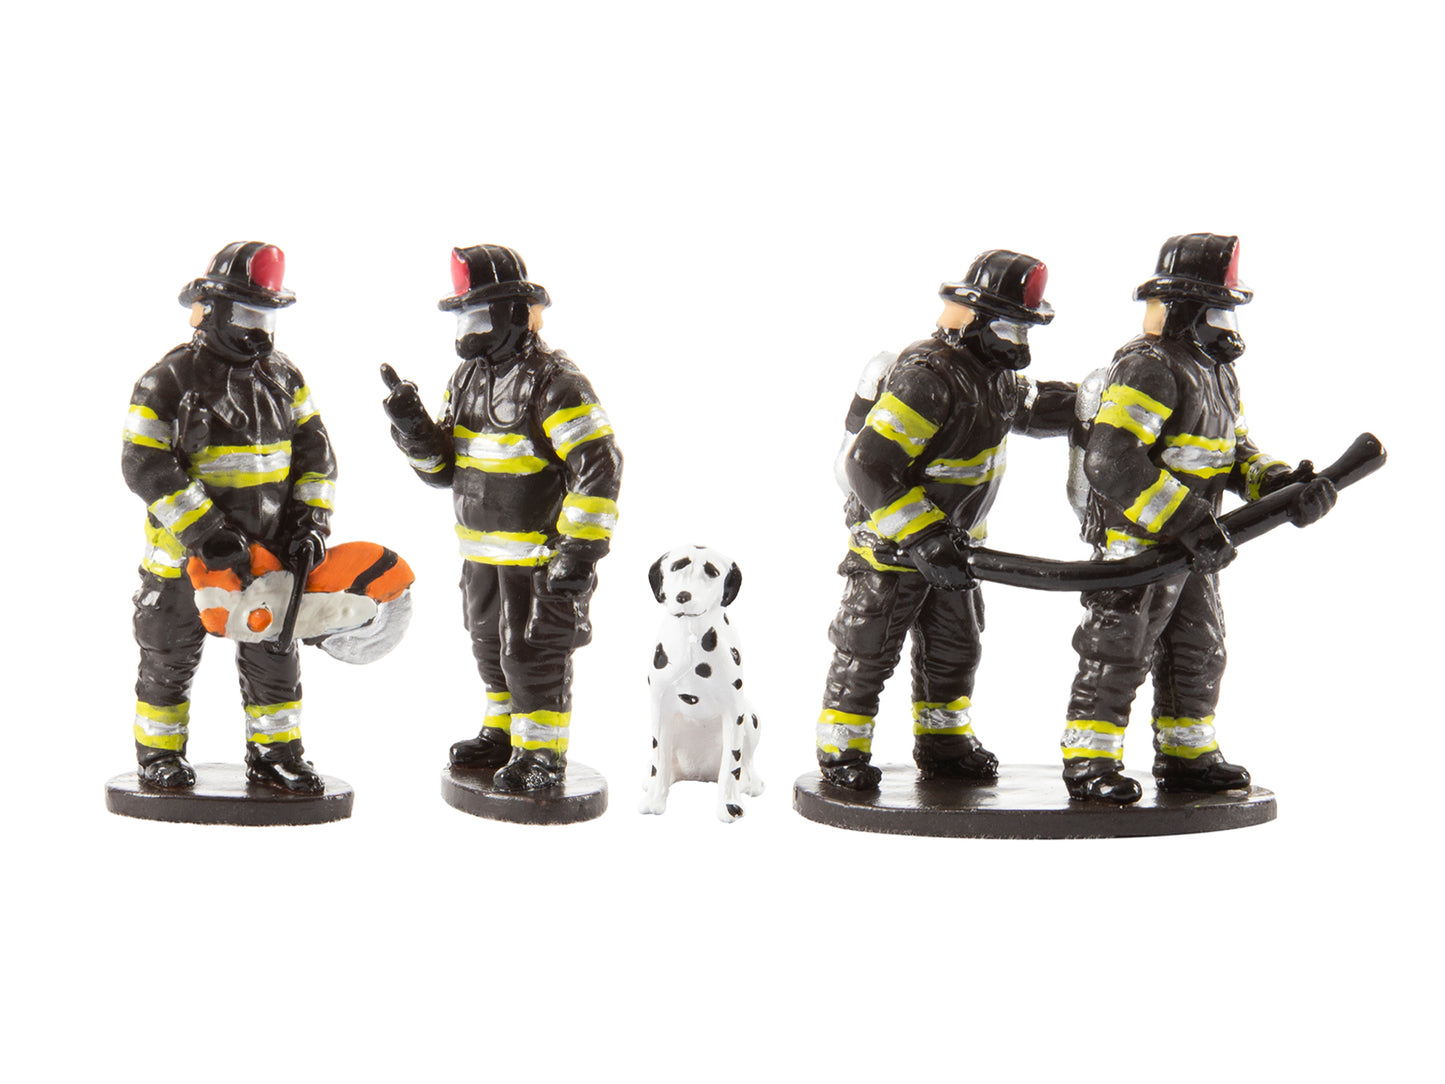 Firefighter figures and Dog